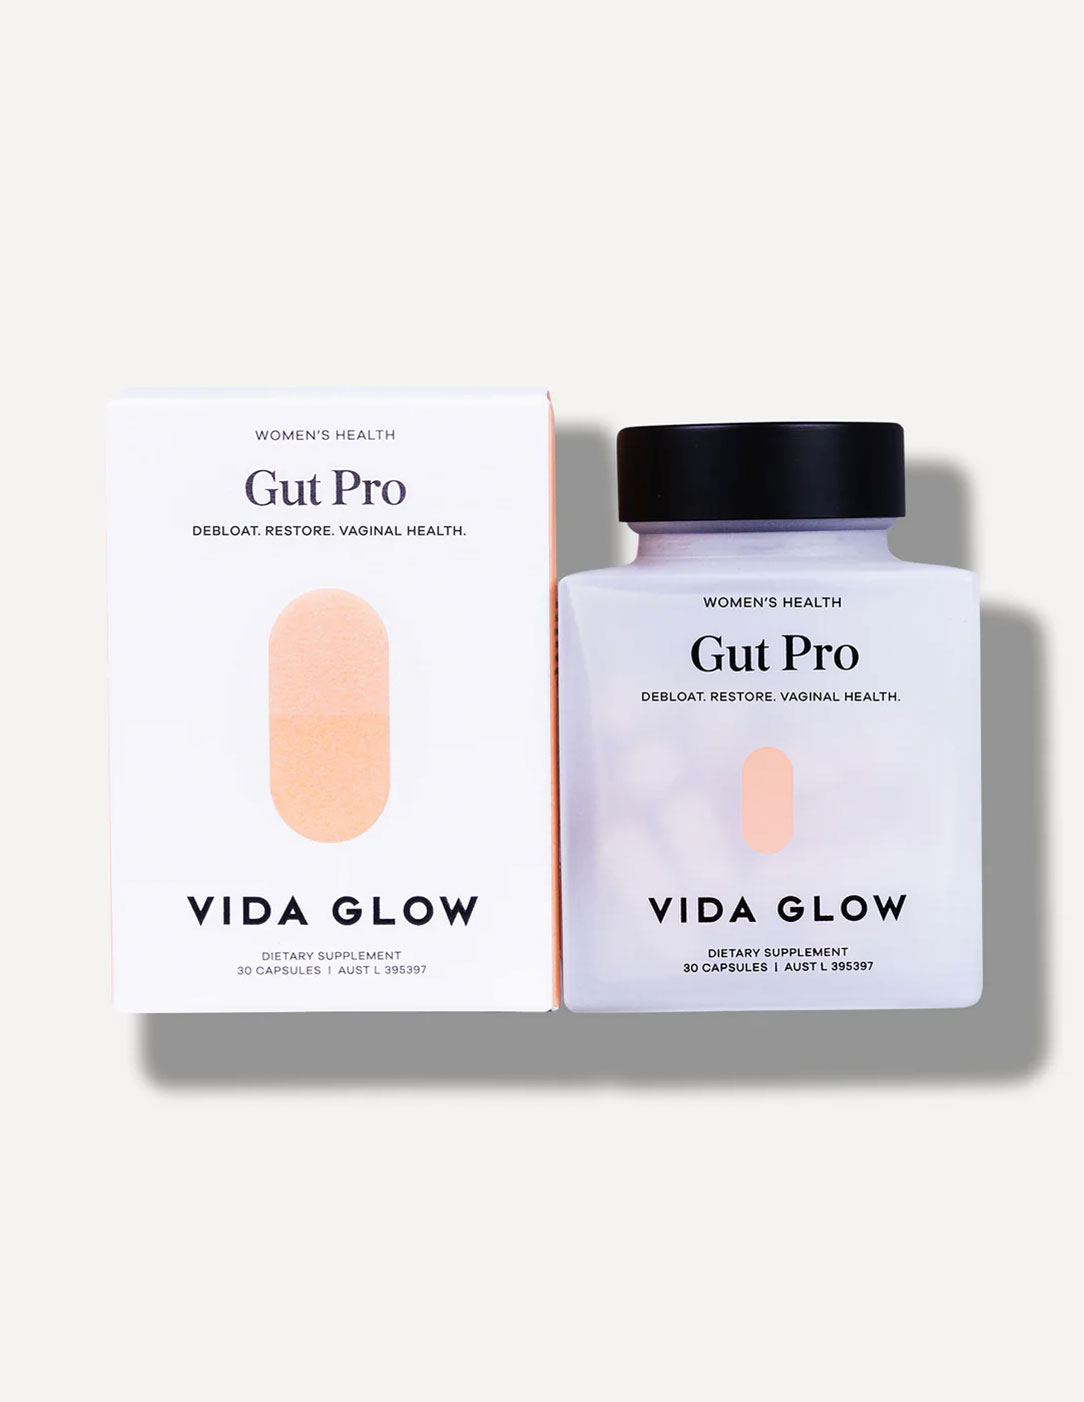 Vida Glow’s Gut Pro supplement support bloating and vaginal health